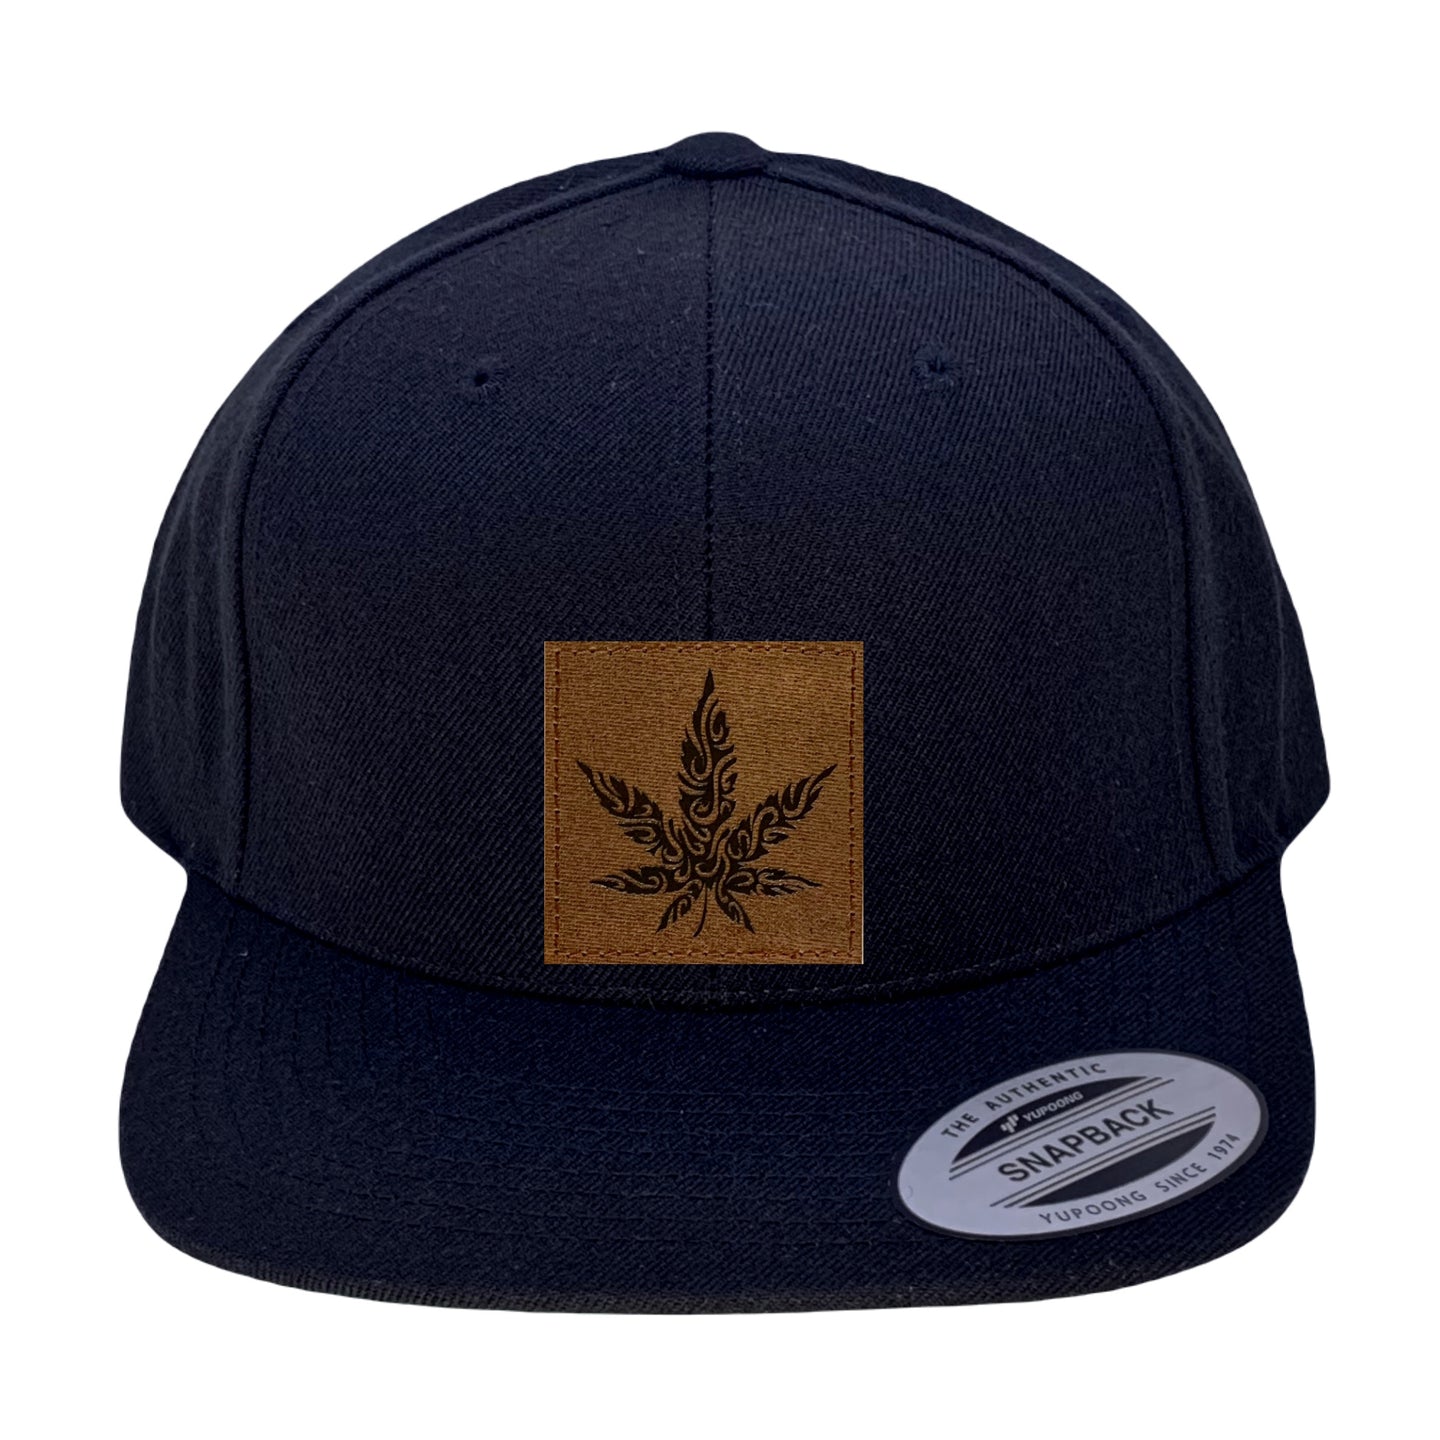 Yupoong 6089 Flat Bill, Hat / Visor with Green Under Bill and Handmade Vegan Leather Brown/White Cannabis Patch by Buddha Gear.